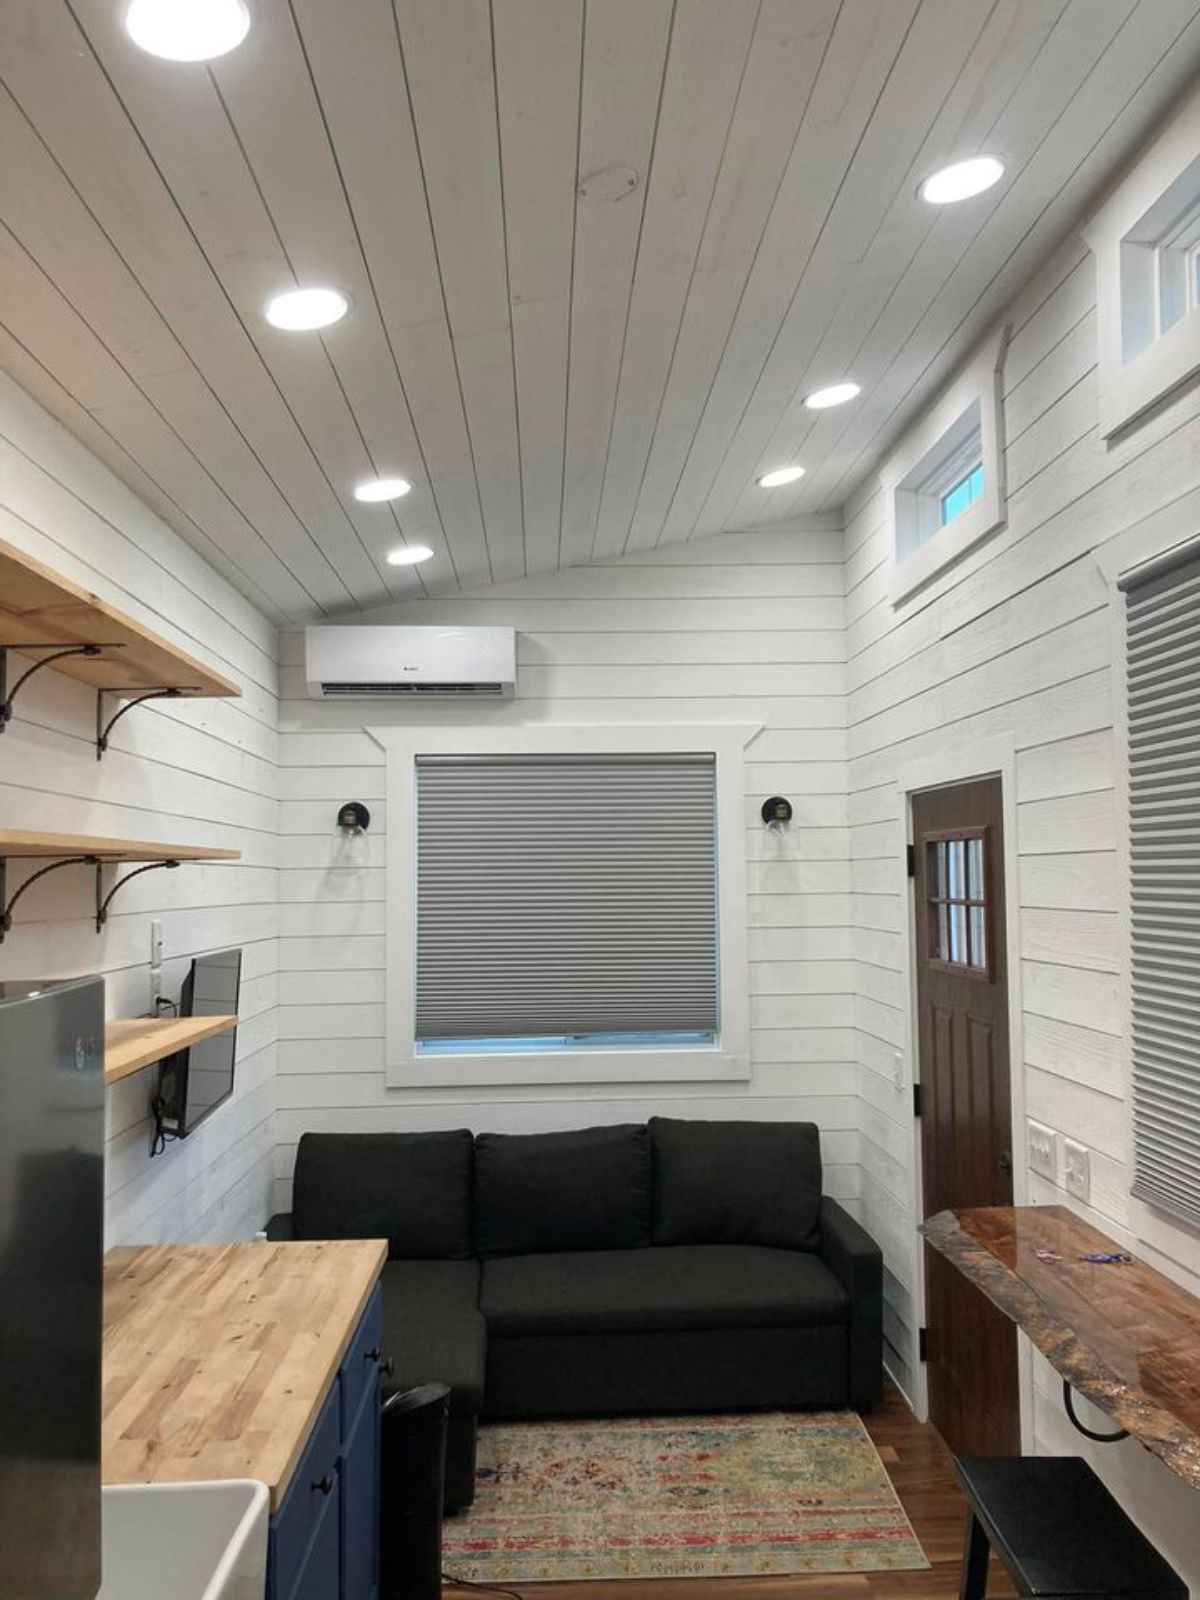 white shiplap walls inside tiny house with black sofa against back wall